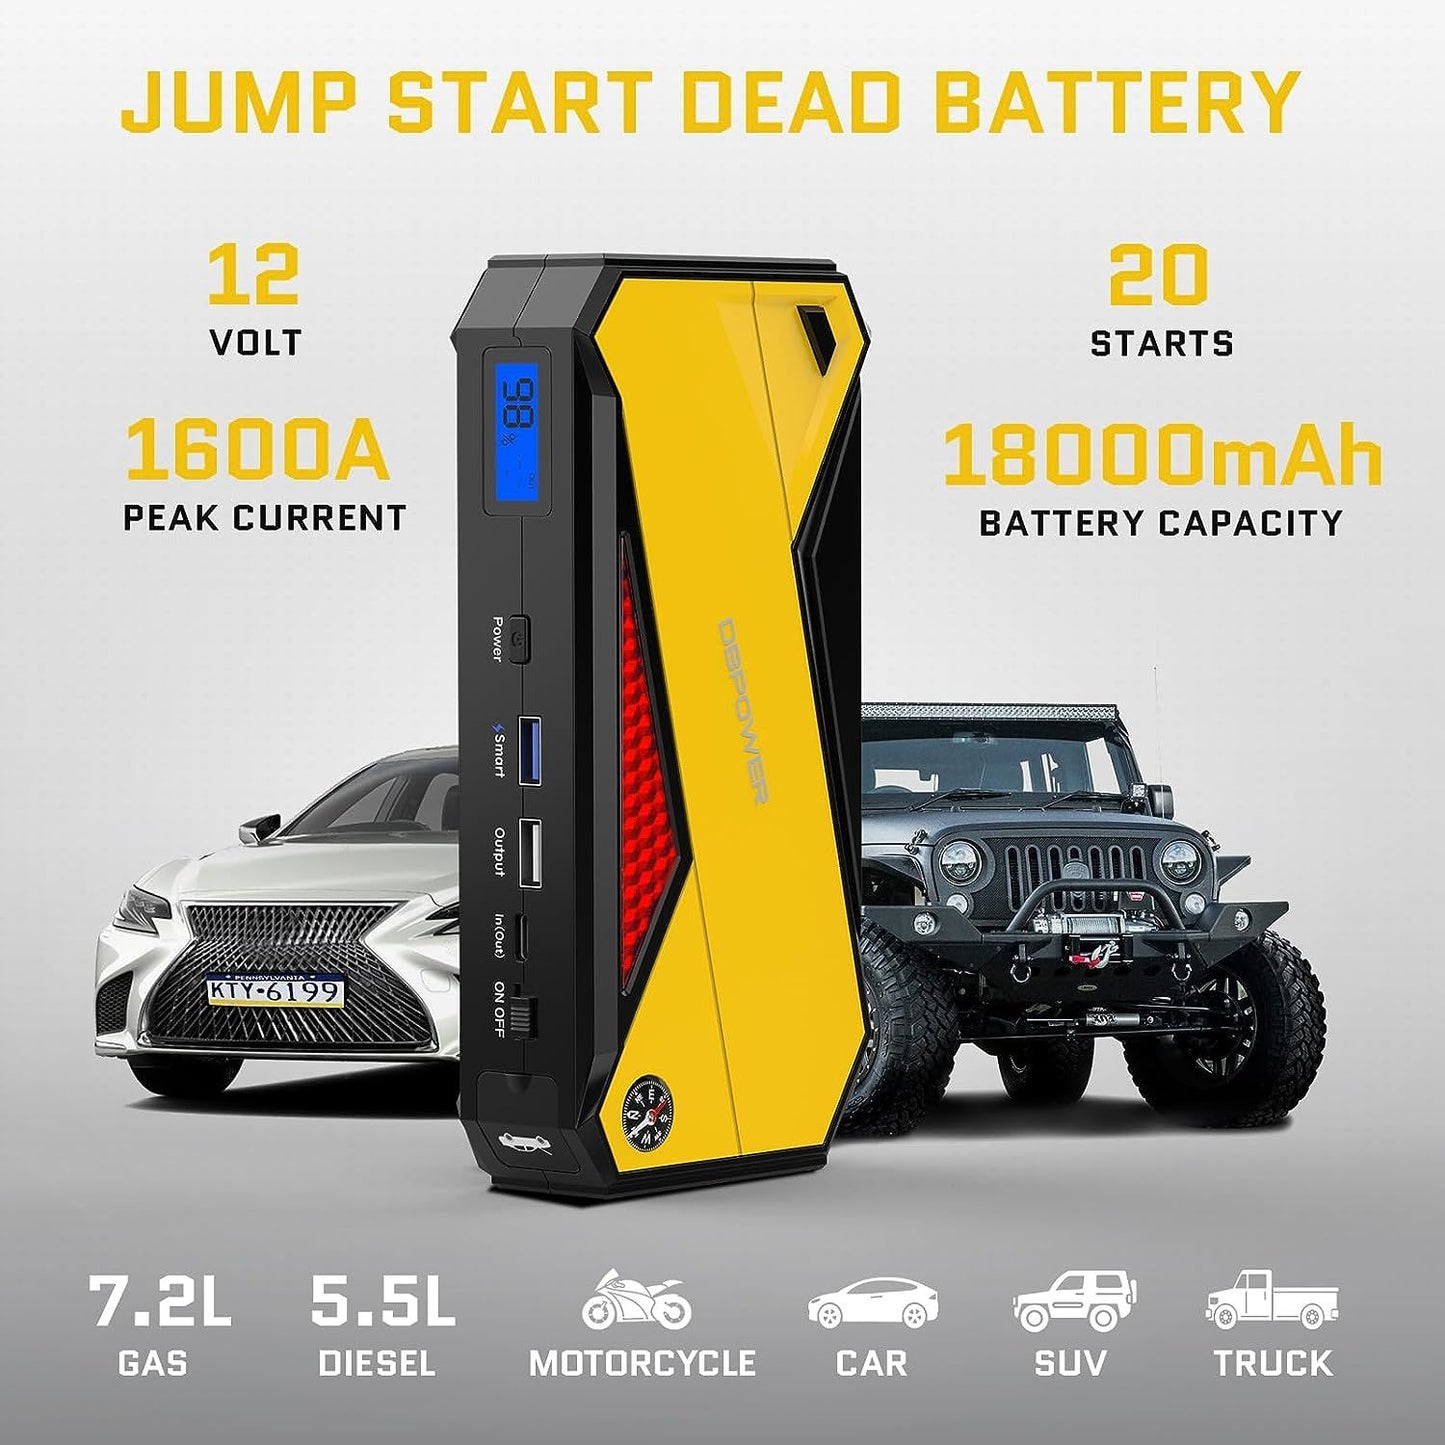 DBPOWER 800A 18000mAh Portable Car Jump Starter (up to 7.2L Gas, 5.5L Diesel Engine) Battery Booster with Smart Charging Port (Storage Temperature 95°F)